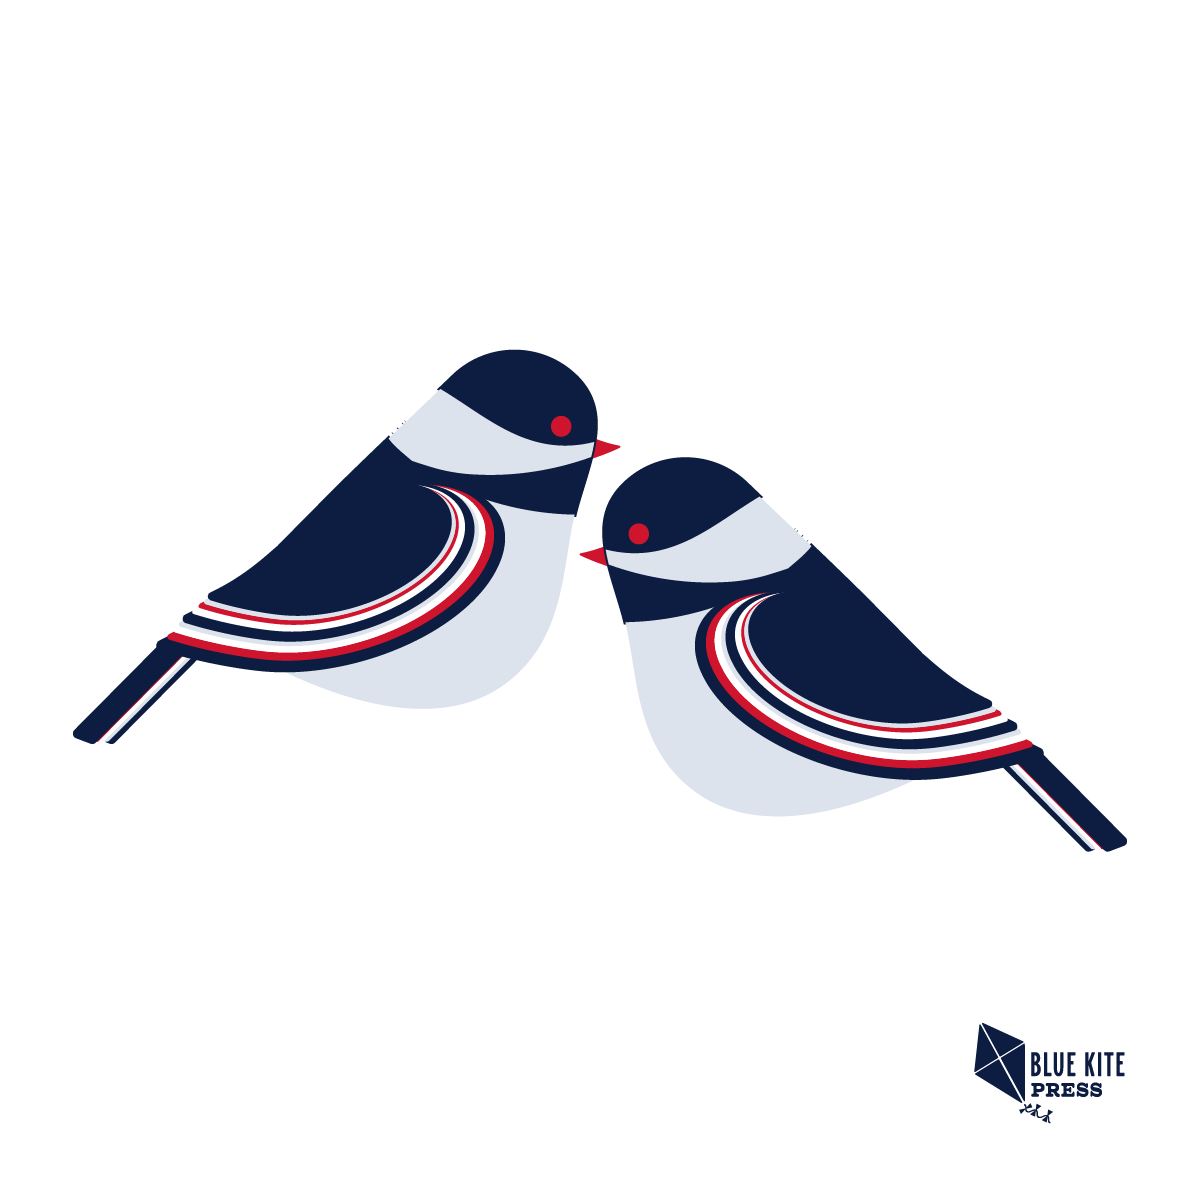 Chickadee collection from Blue Kite Press. Nostalgic illustration of a pair of red and blue mid-century inspired chickadees.